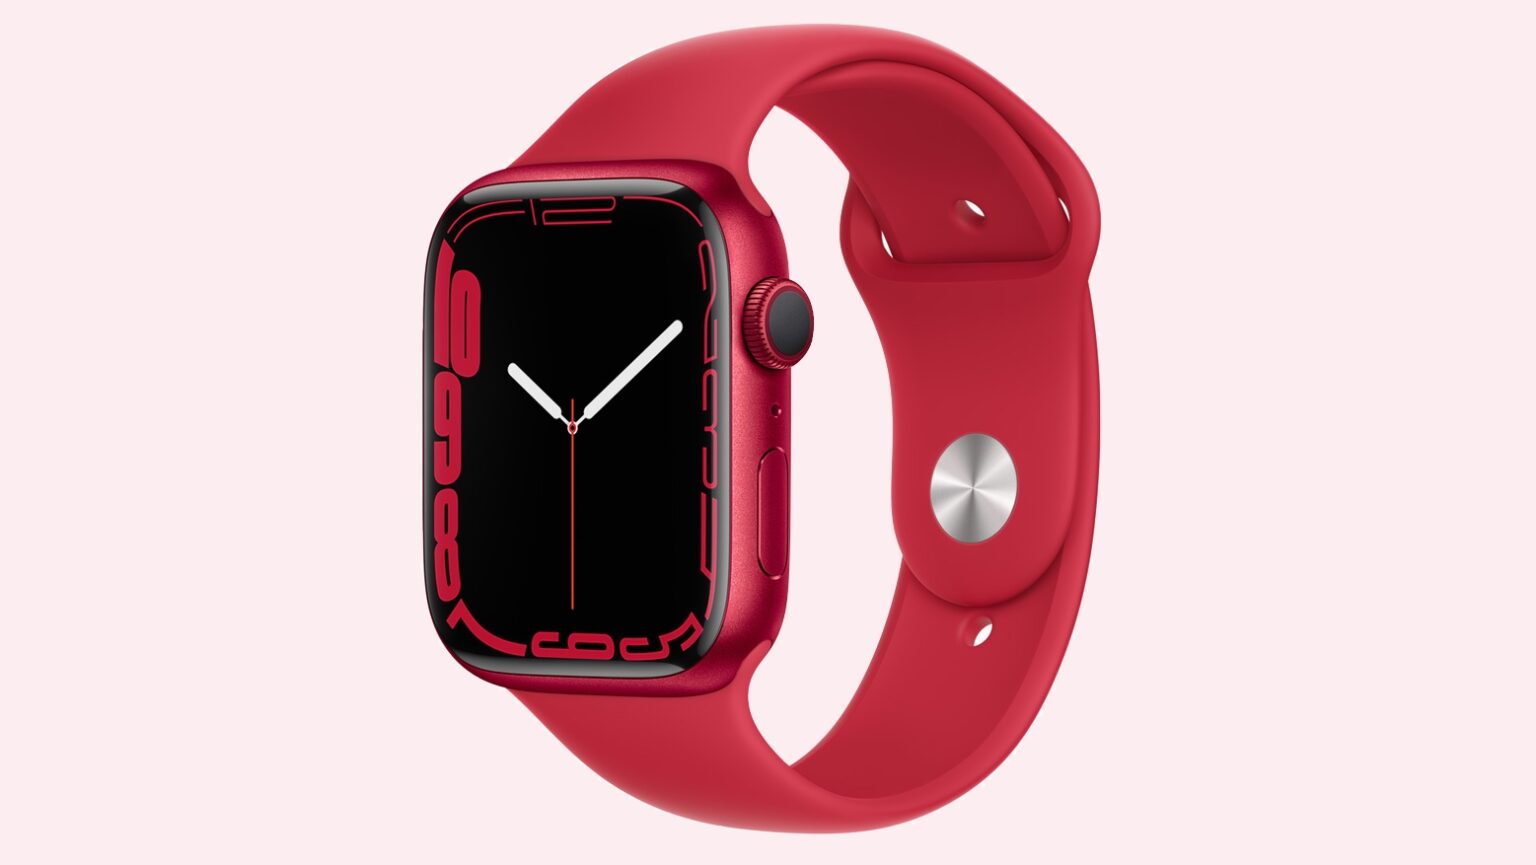 Apple stays strangely silent on most Apple Watch Series 7 prices